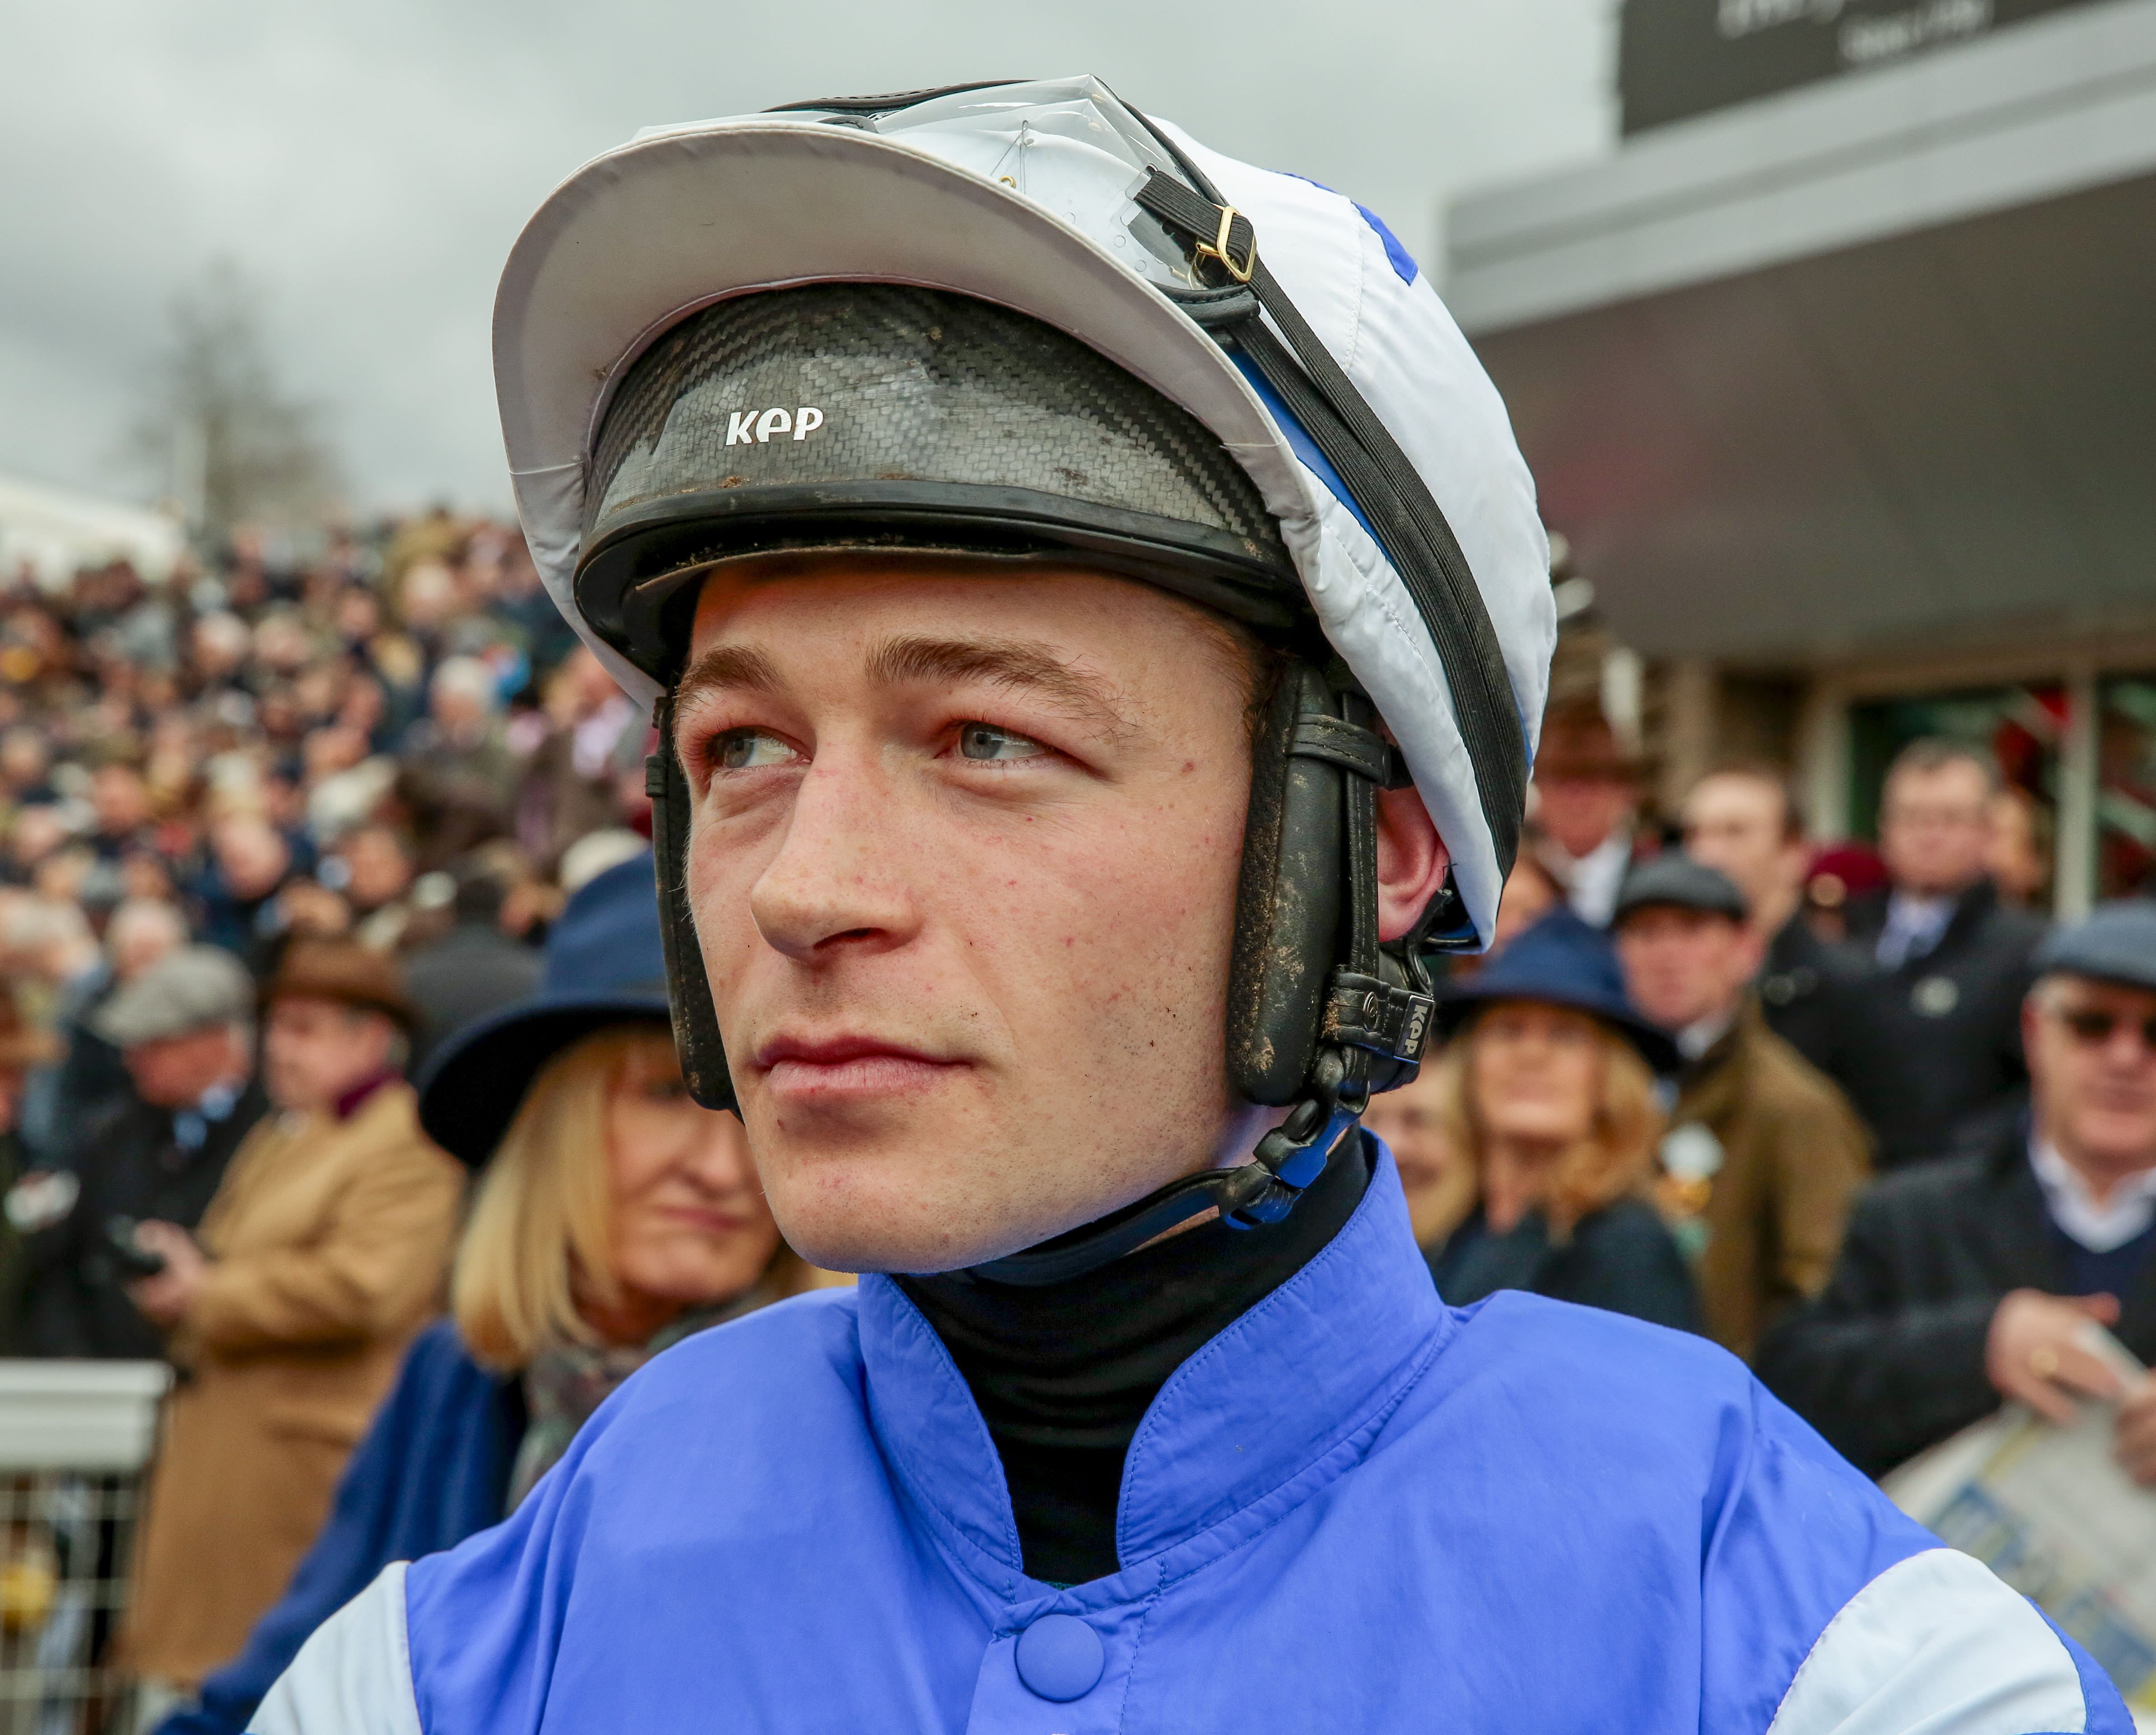  David Mullins has been looking to quit riding for some time (Focusonracing)